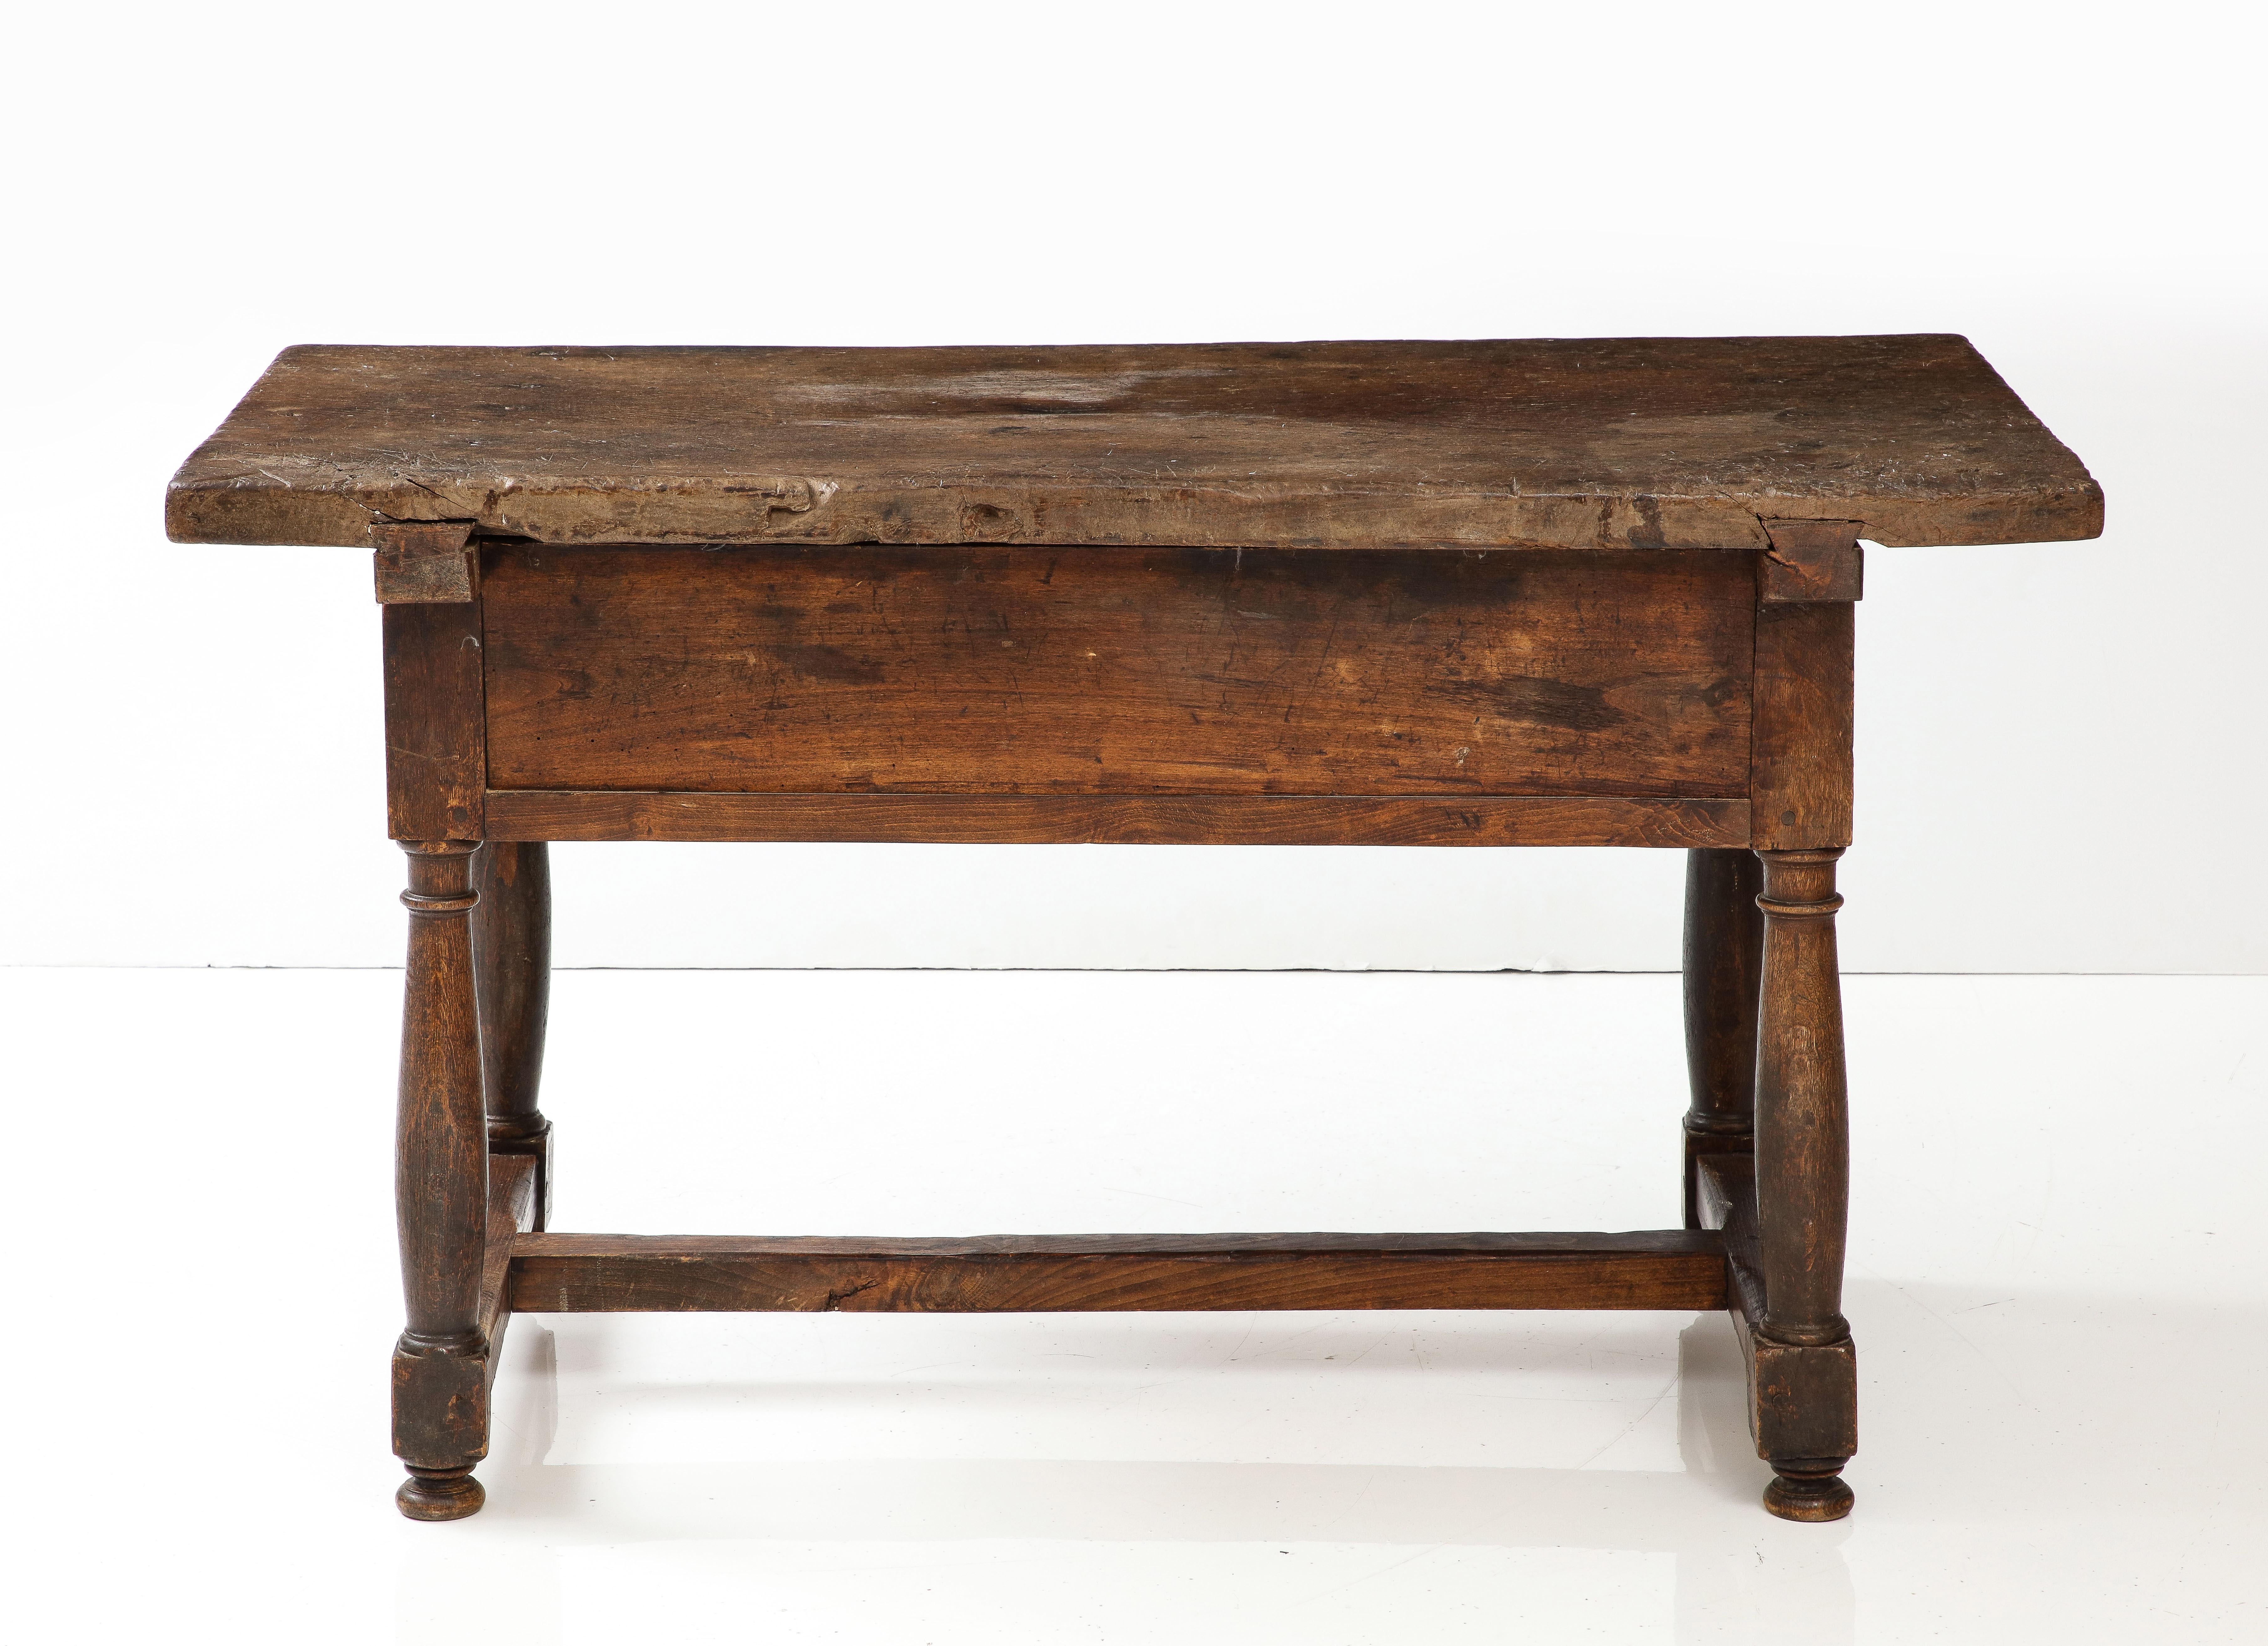 Late 16th C. Spanish Walnut Table with Iron Pulls & Drawers For Sale 13